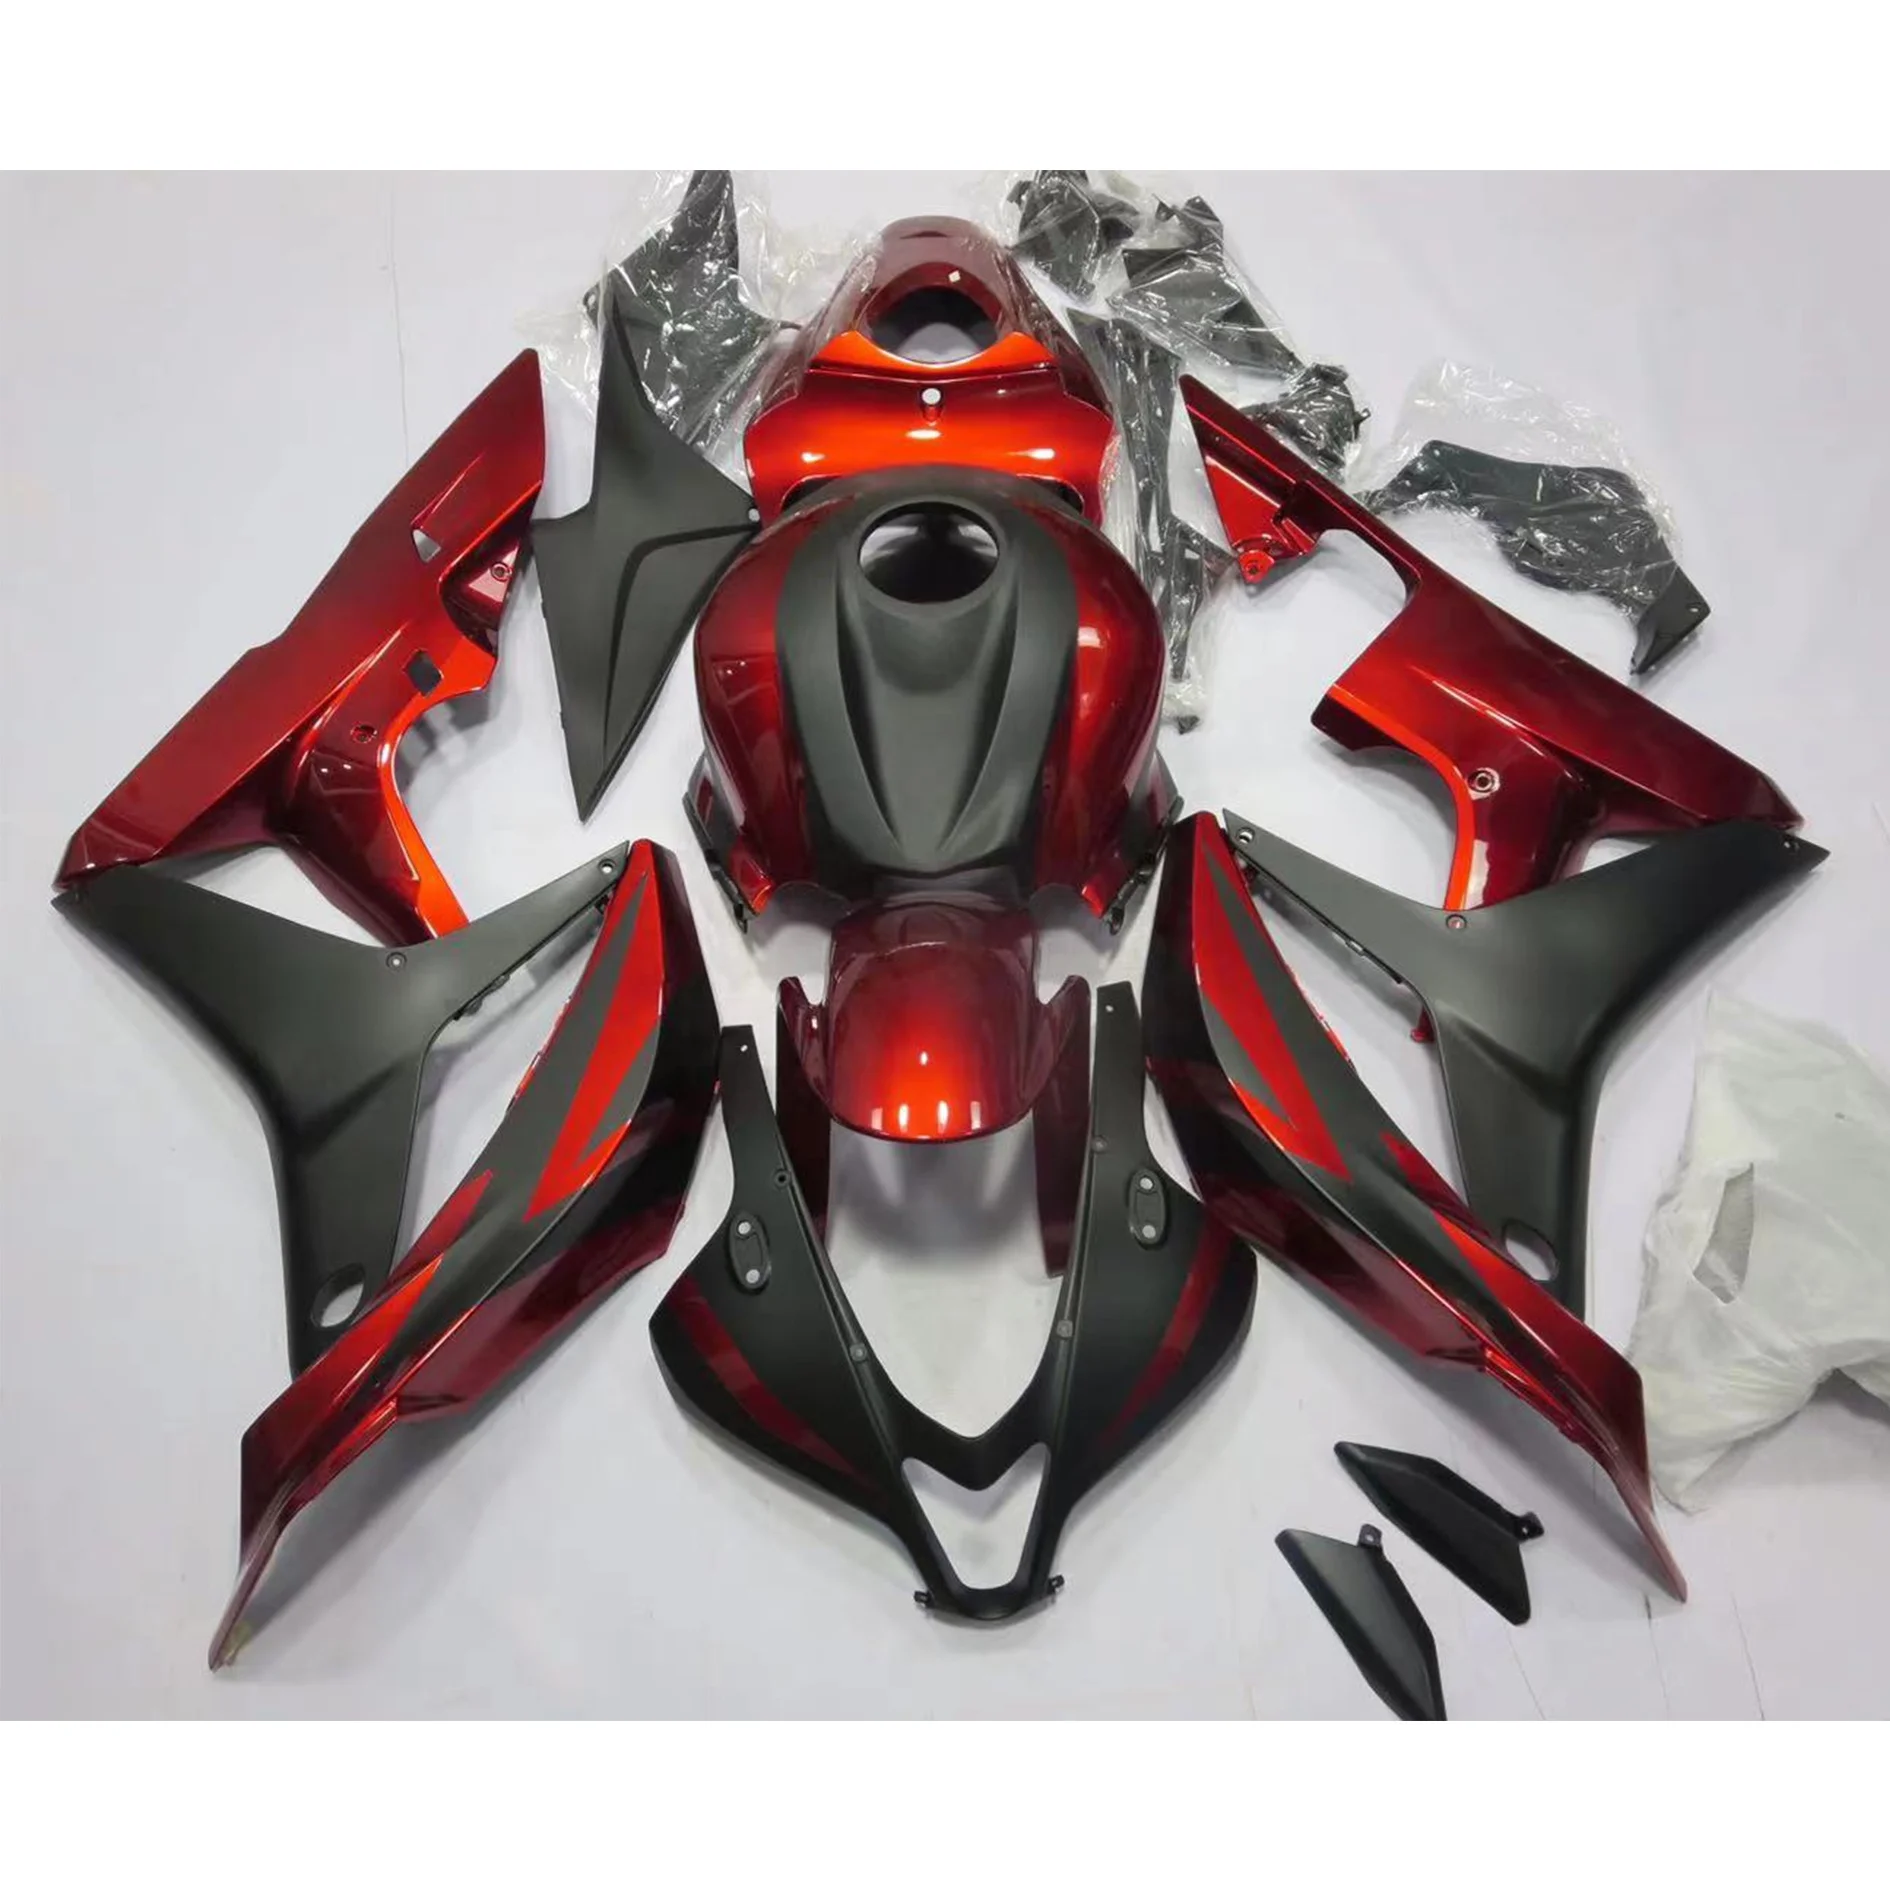 

2022 WHSC Red Blue White OEM Motorcycle Accessories For HONDA CBR600 RR 2007-2008 07 08 Motorcycle Body Systems Fairing Kits, Pictures shown